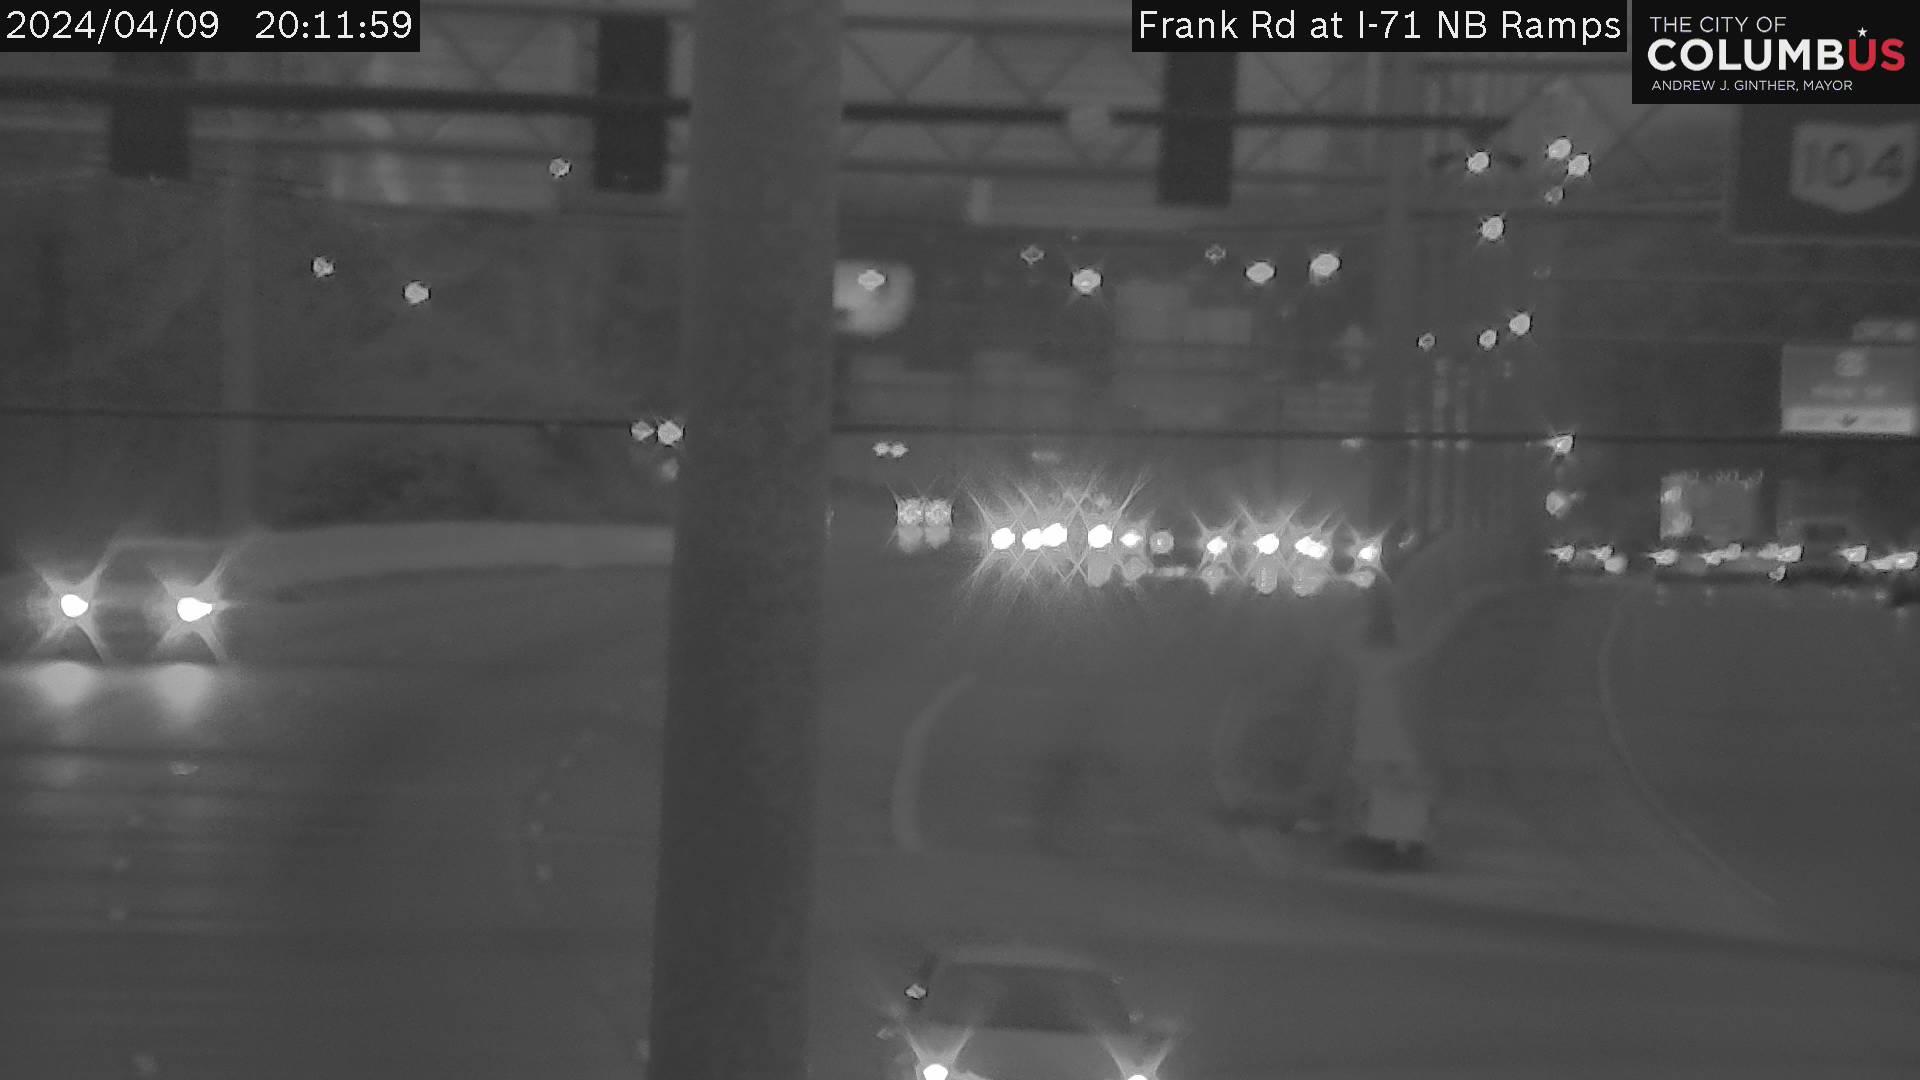 Traffic Cam Steelton: City of Columbus) Frank Rd at I-71 NB Ramps Player